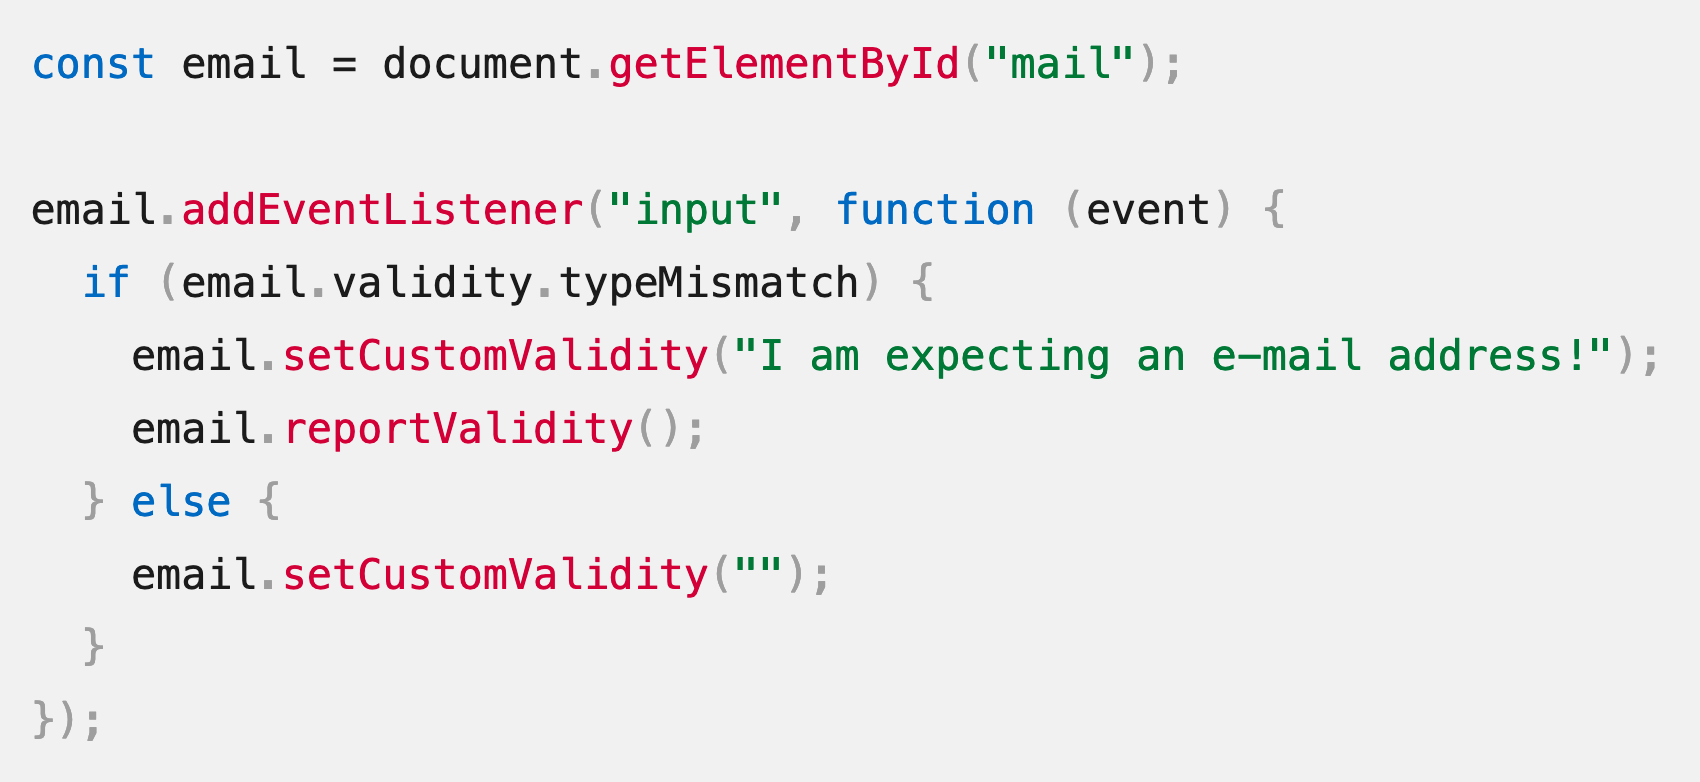 JavaScript source code: const email = document.getElementById("mail");  email.addEventListener("input", function (event) {   if (email.validity.typeMismatch) {     email.setCustomValidity("I am expecting an e-mail address!");     email.reportValidity();   } else {     email.setCustomValidity("");   } });